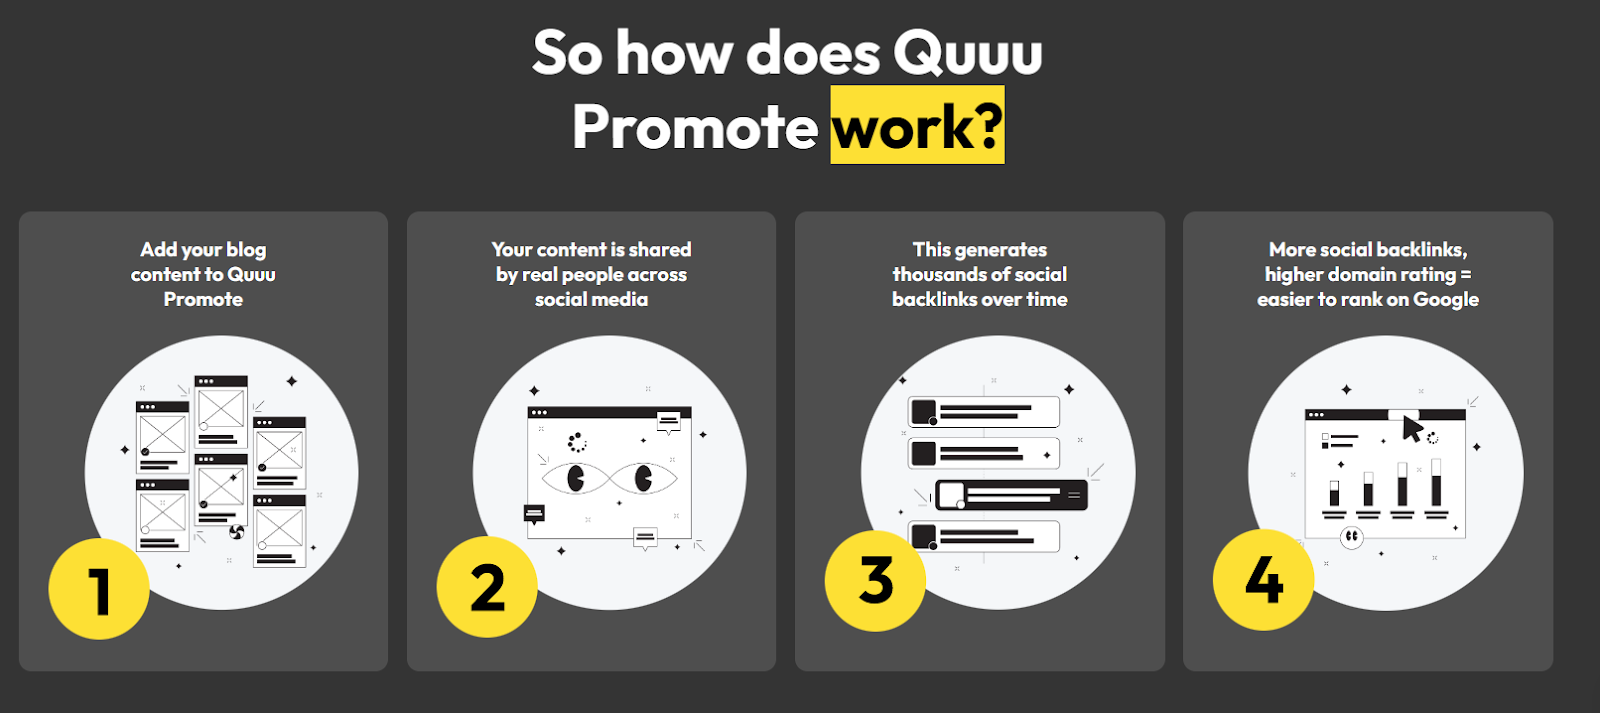 An infographic showing how Quuu Promote creates thousands of shares and backlinks.